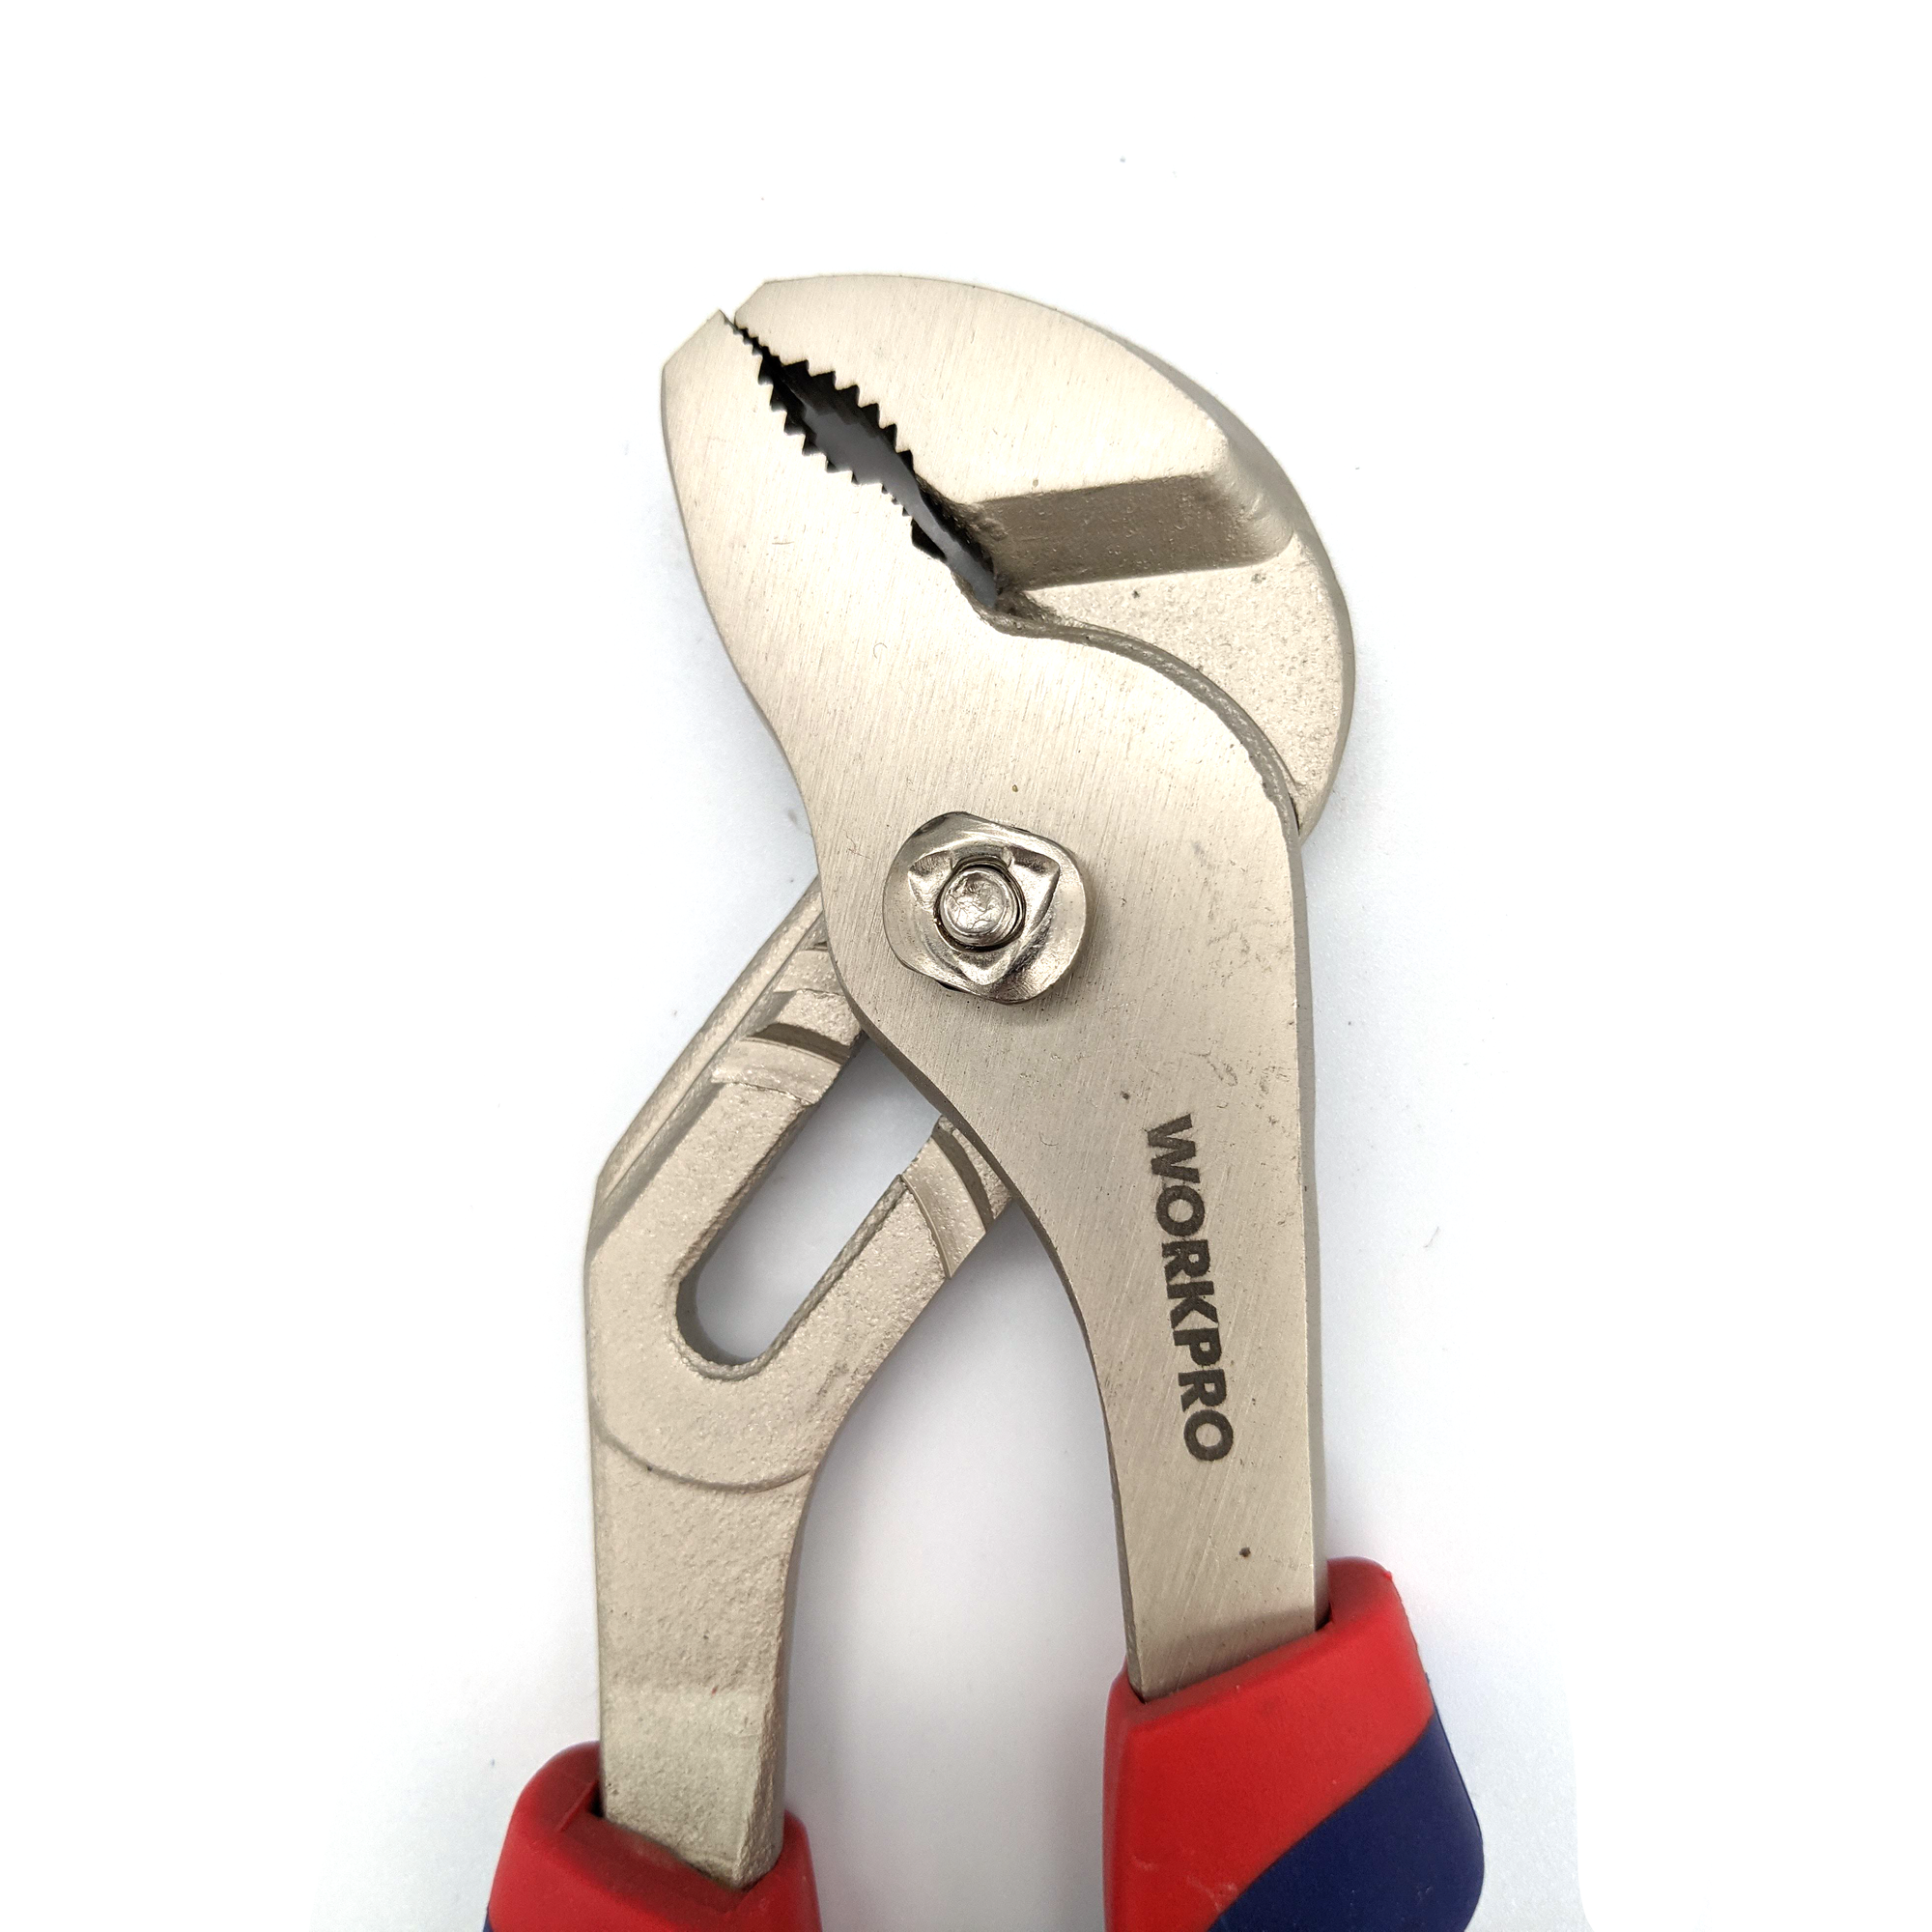 Workpro Groove Joint Pliers 300Mm(12Inch)